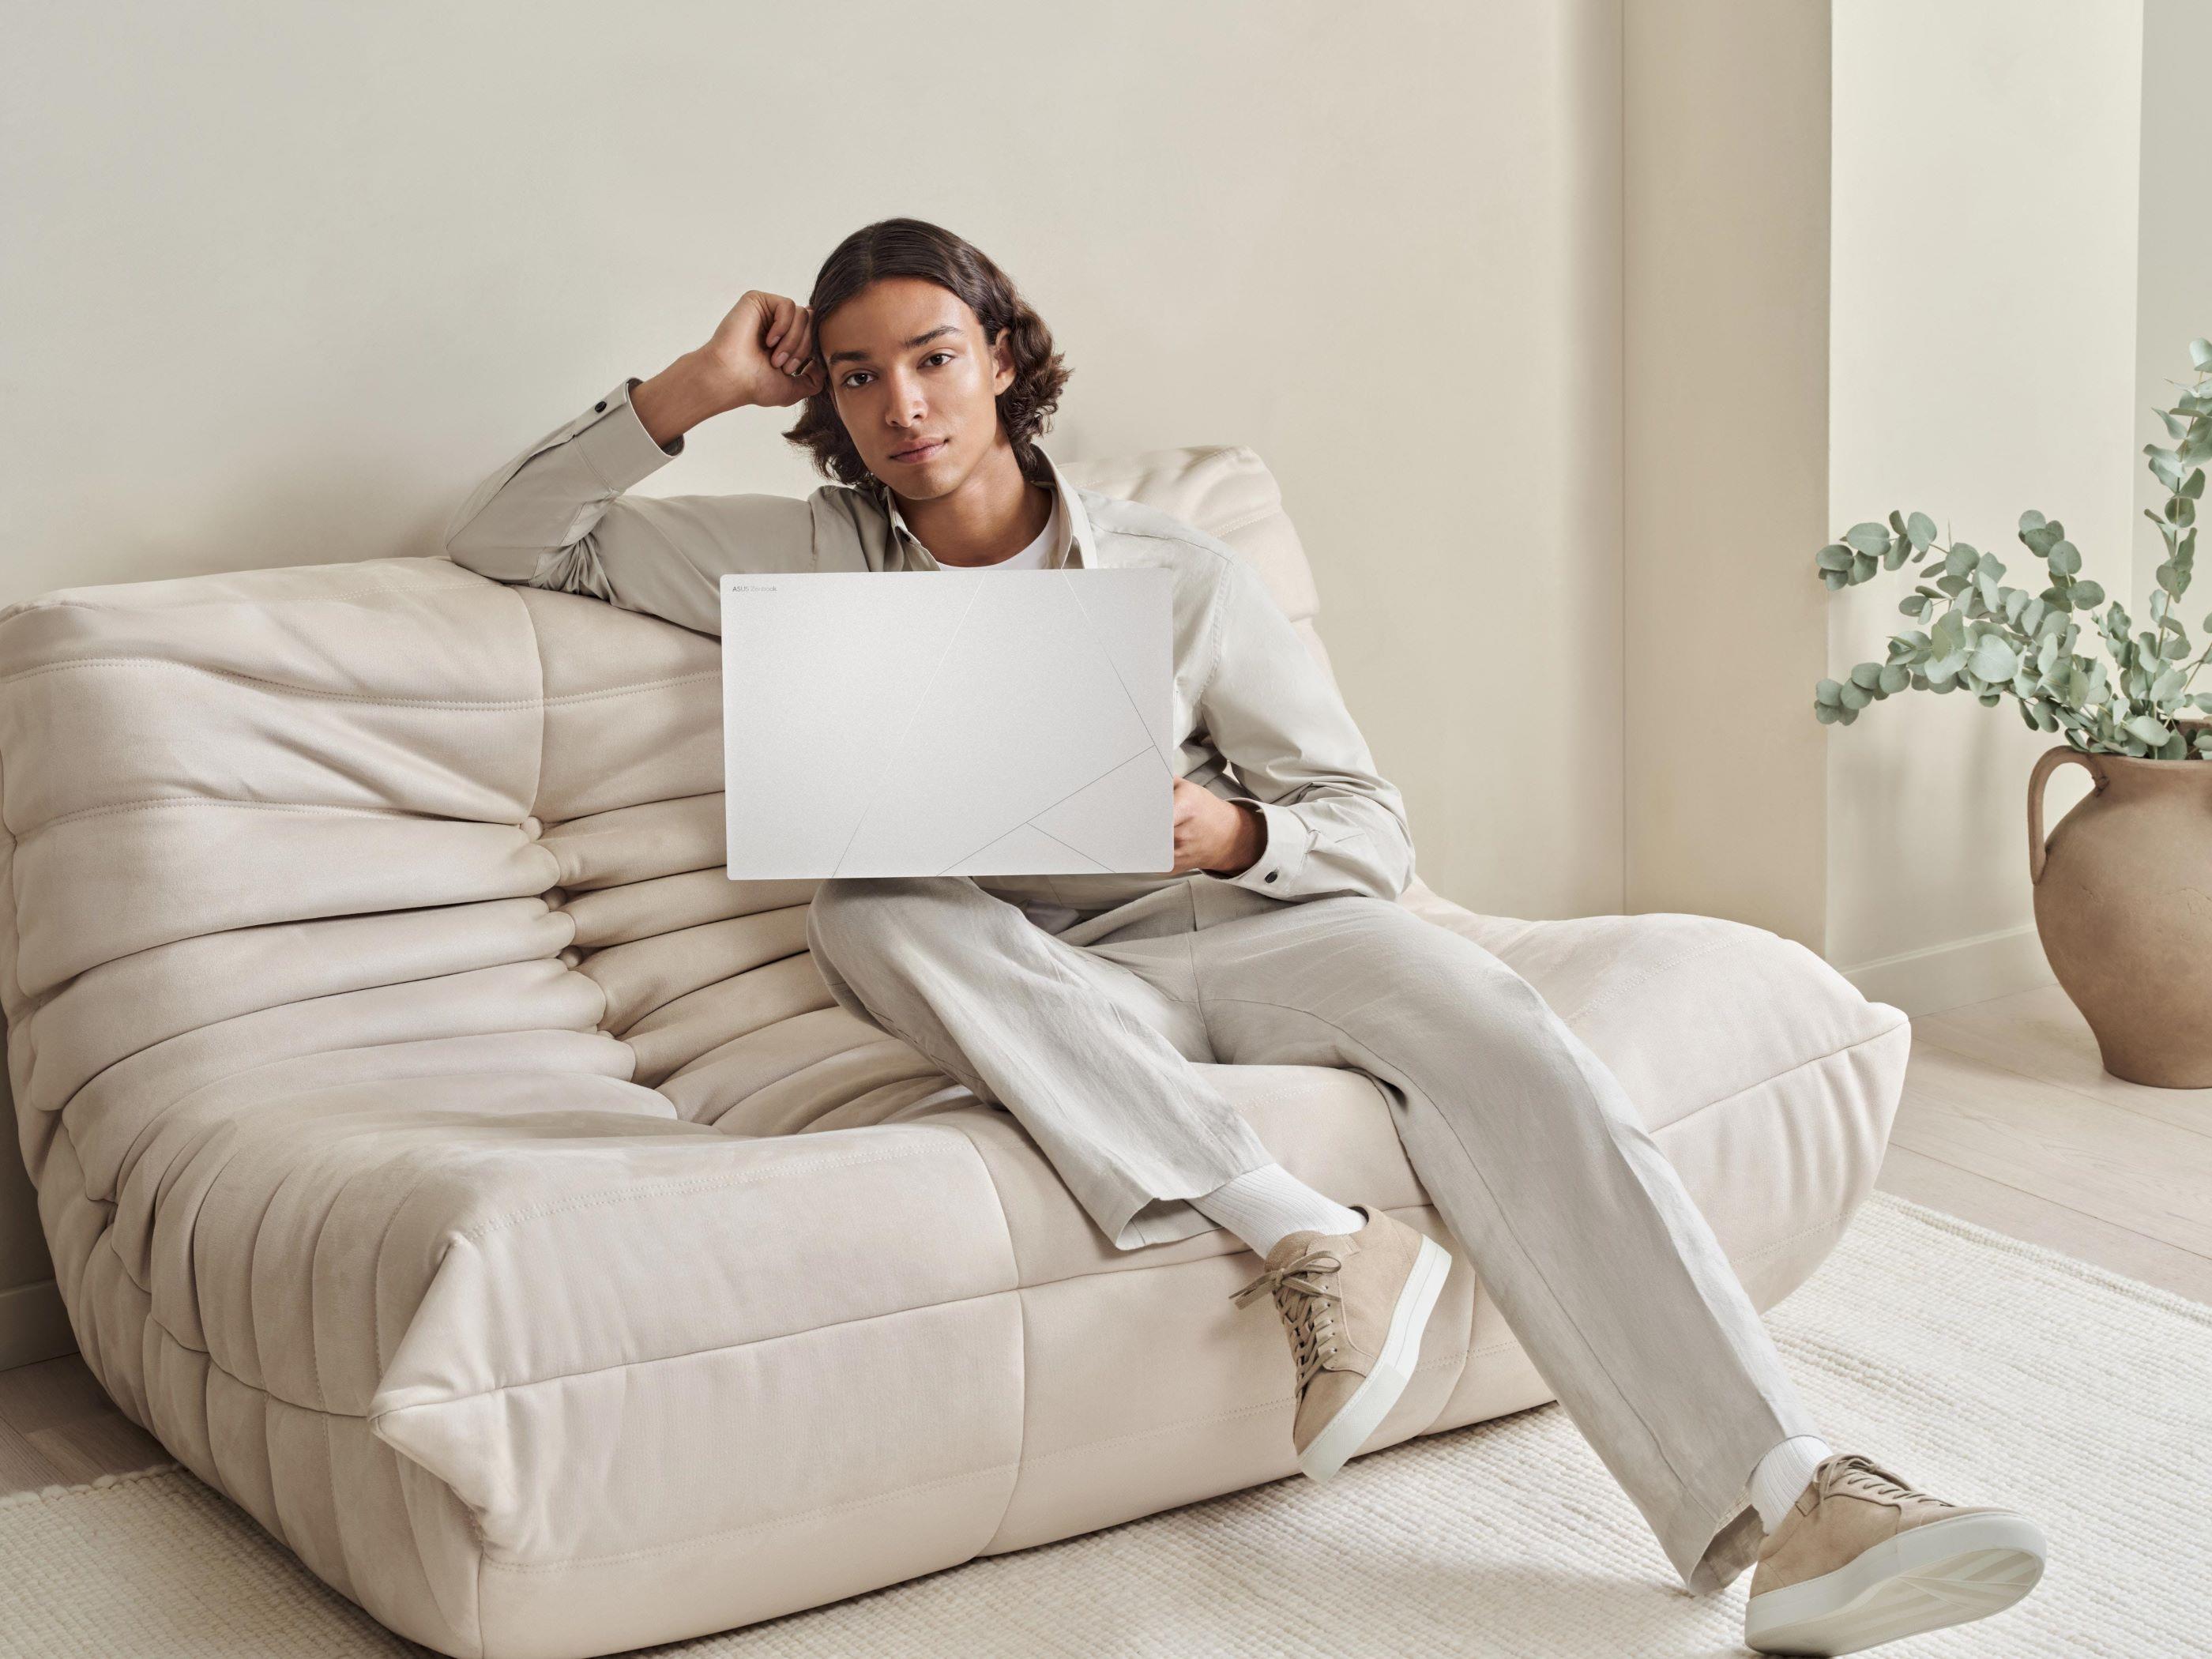 A person in a beige room with an ASUS laptop